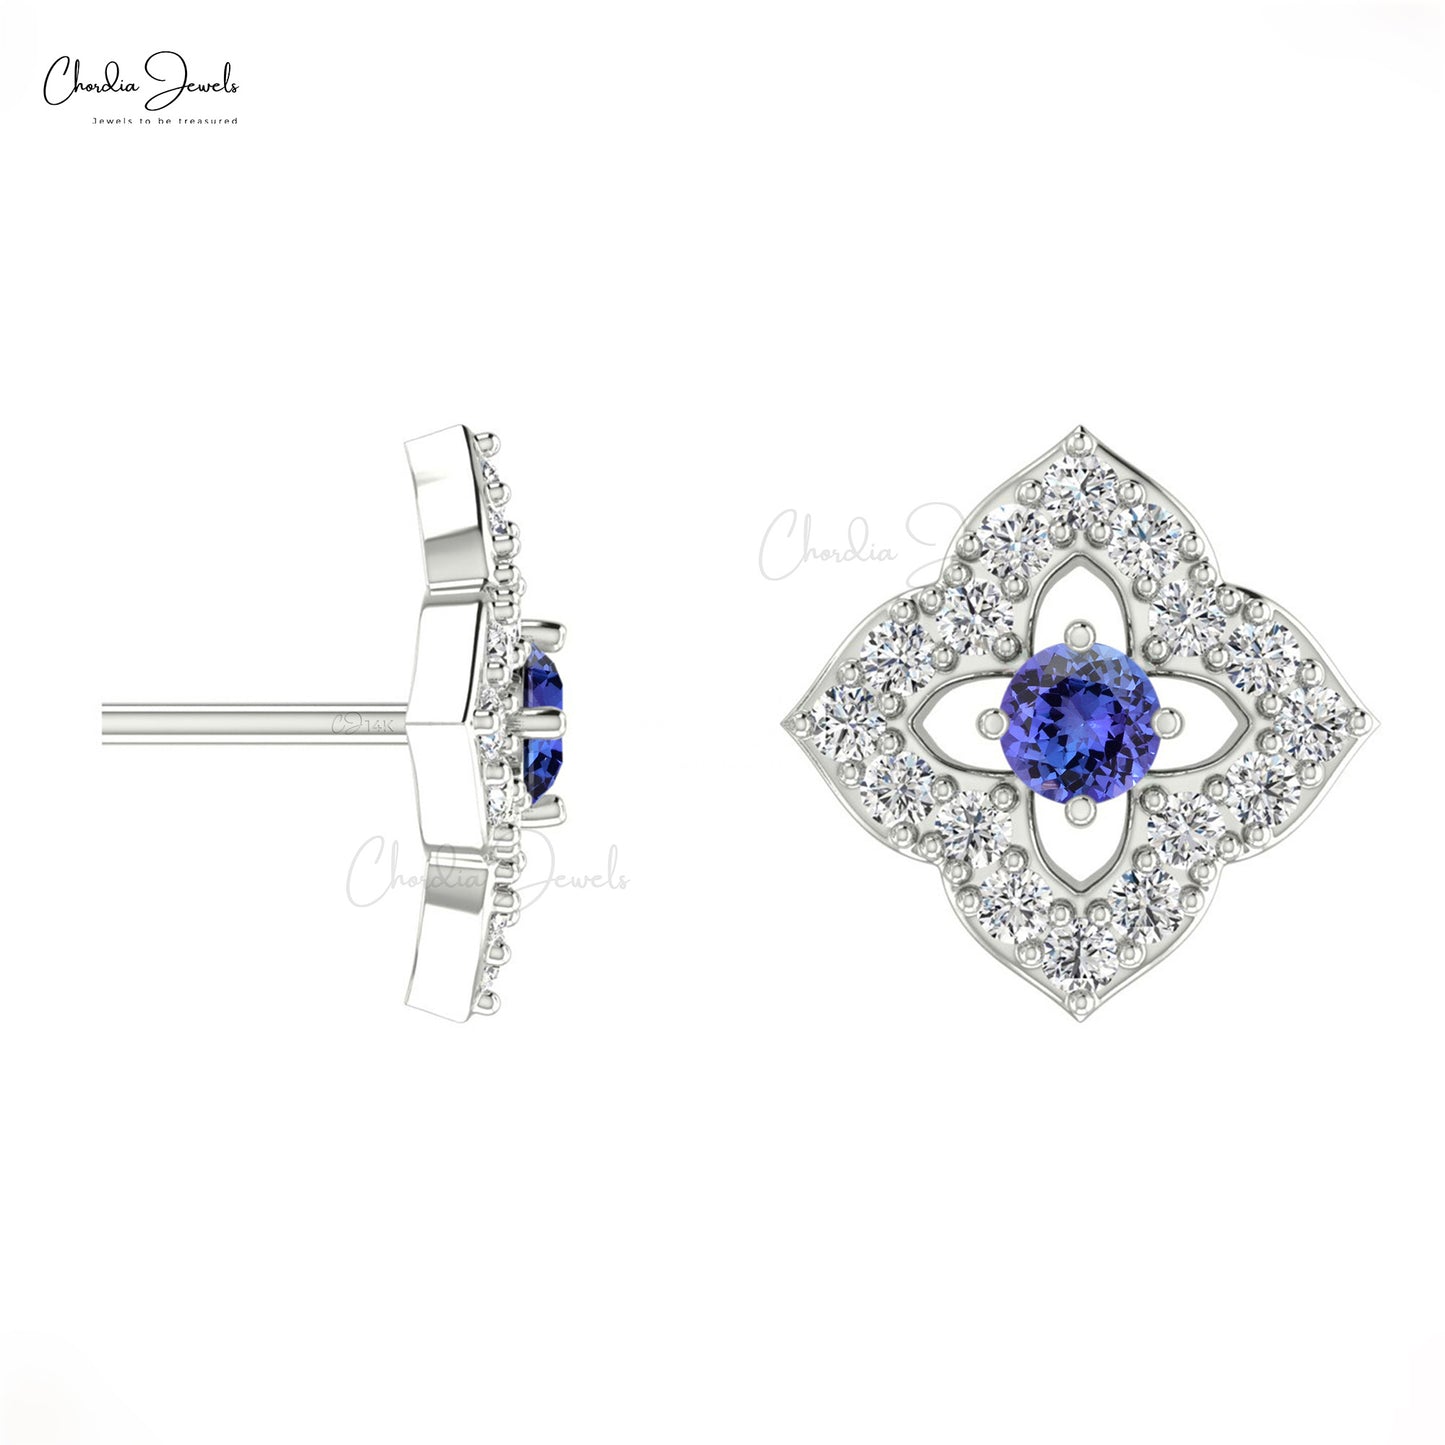 Load image into Gallery viewer, Real 14k Gold 0.10 Ct White Diamond Floral Studs For Wedding 2mm Round Cut December Birthstone Natural Tanzanite Minimalist Stud Earrings Jewelry
